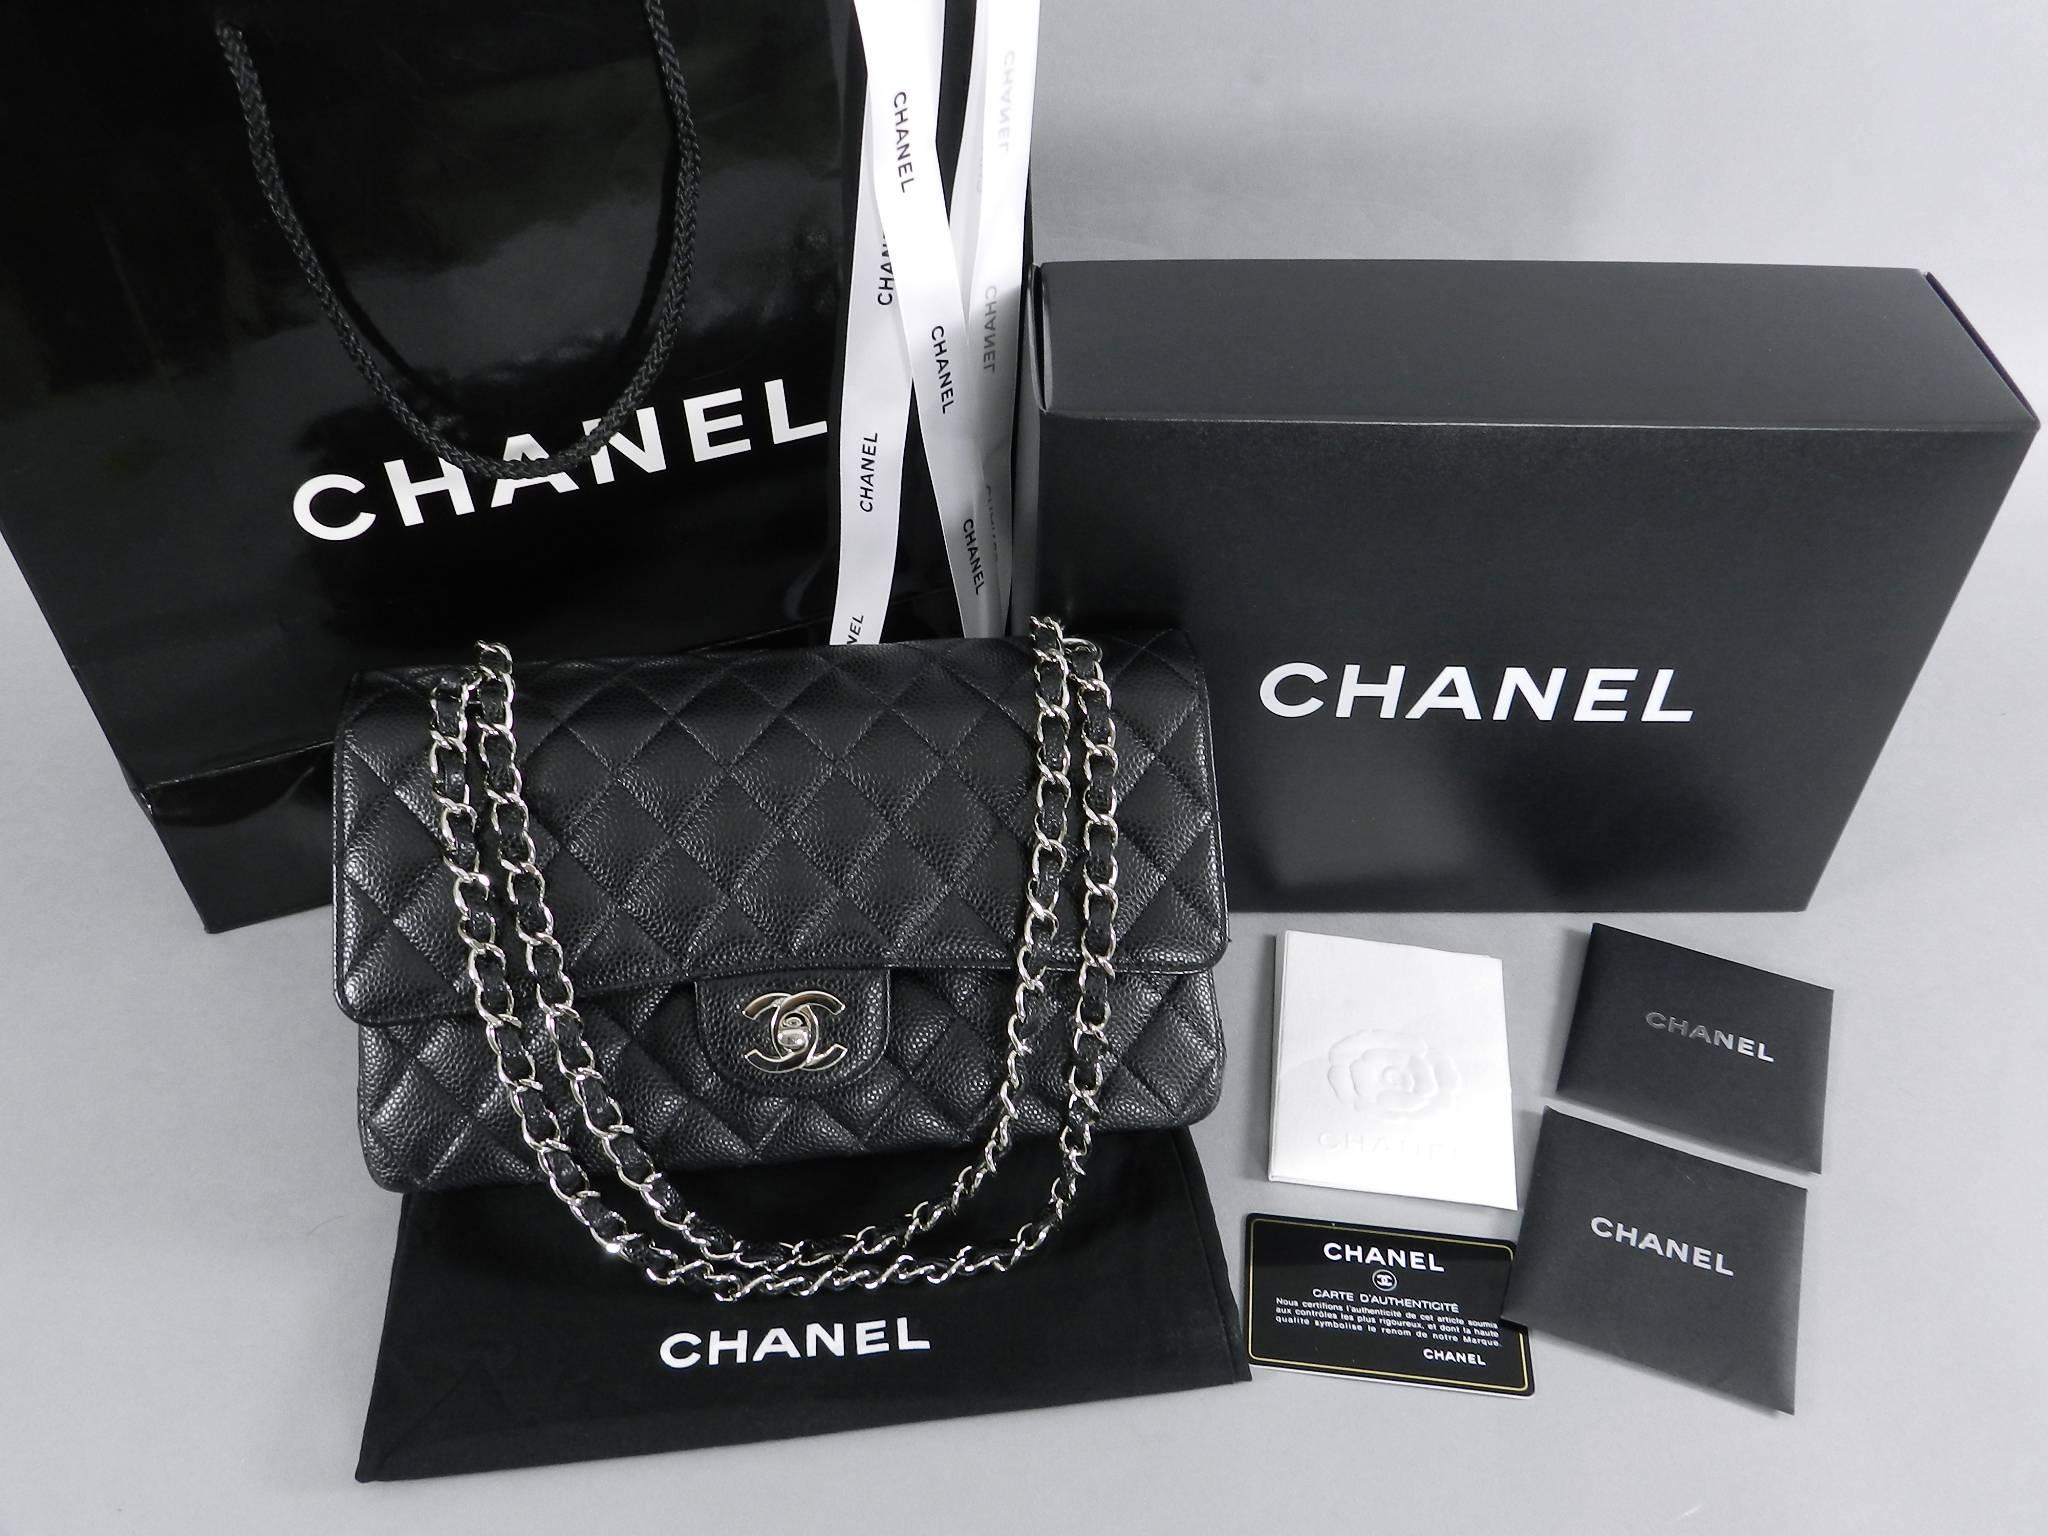 CHANEL Classic Double Flap 2.55 Medium Bag. Black caviar leather with all black leather interior. Silvertone metal hardware.  Double flap design with quilted CC logo on interior.  Medium size style number A01112 measuring 10